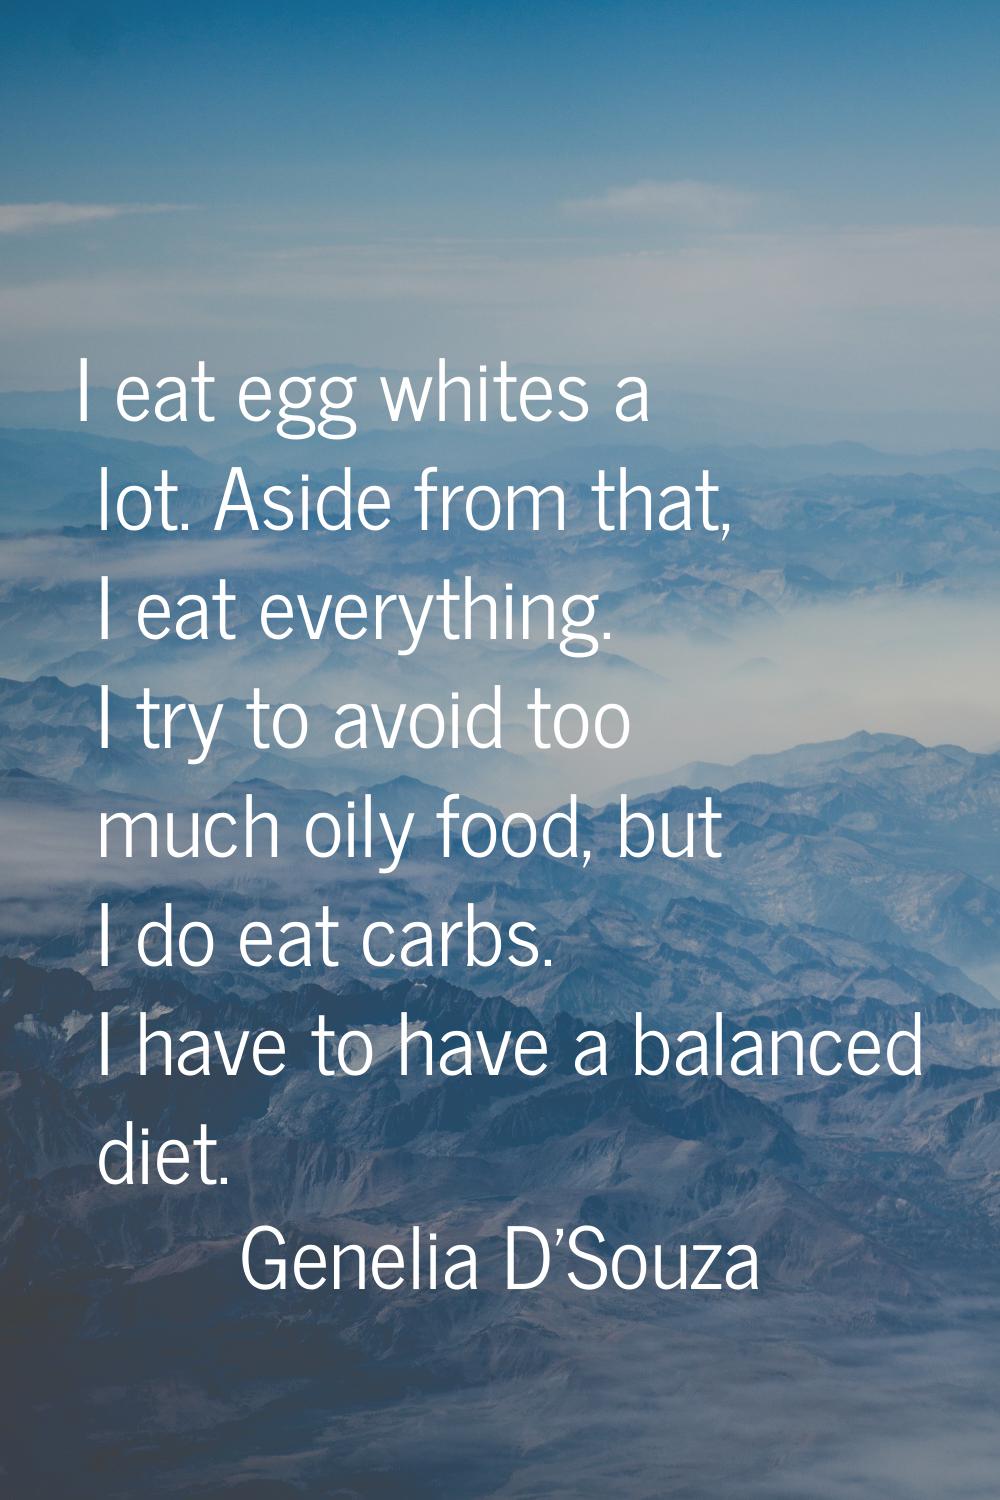 I eat egg whites a lot. Aside from that, I eat everything. I try to avoid too much oily food, but I